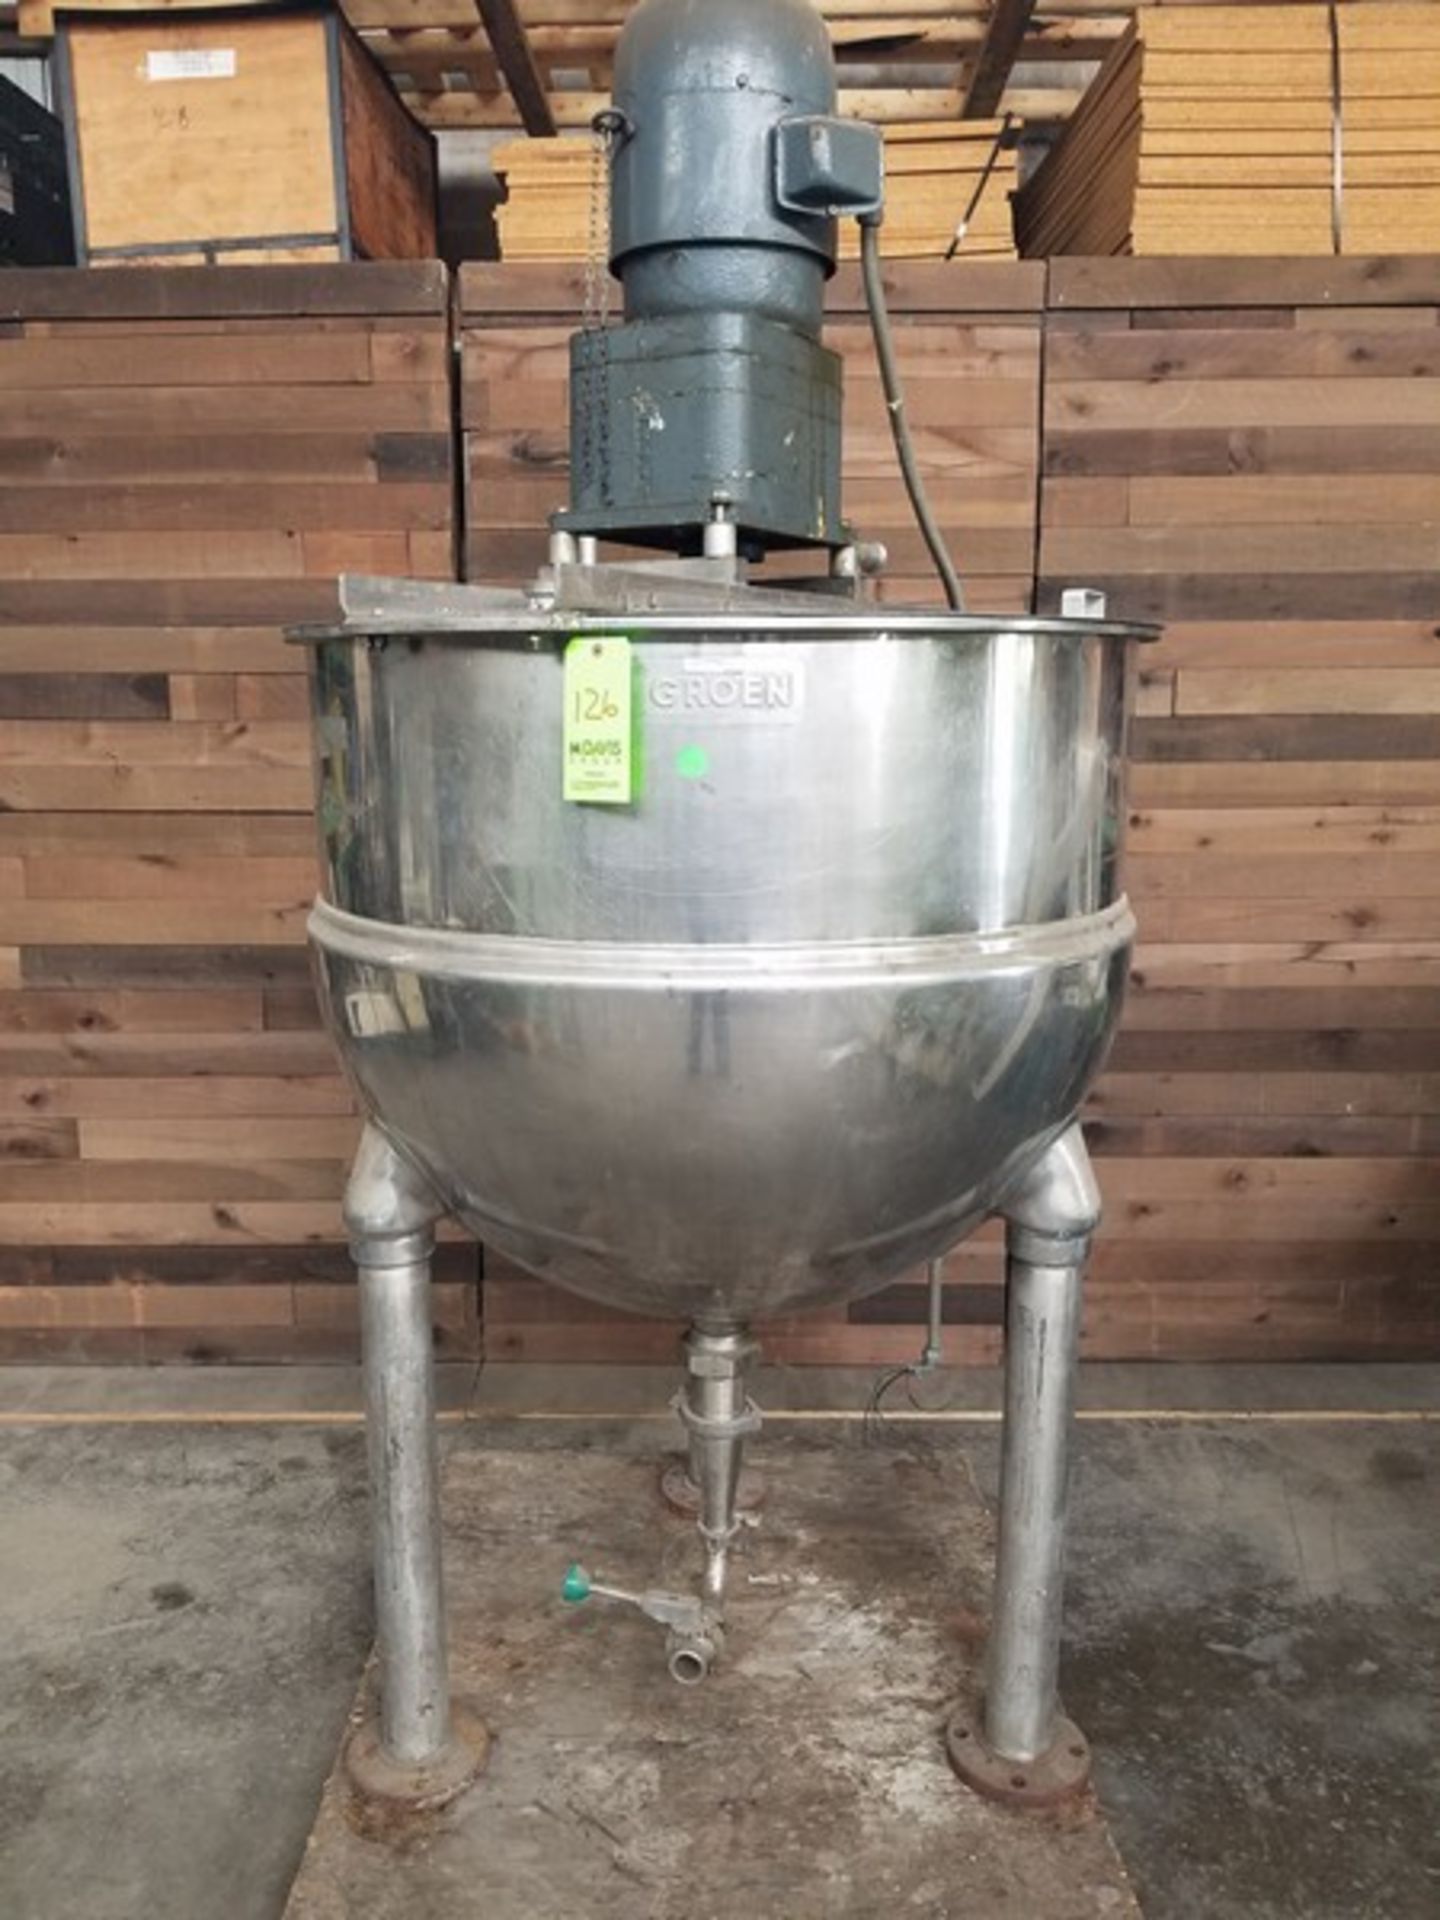 Groen Aprox. 200 Gal. Stainless Steel Jacket Tank, size: 30" wide x 24" deep, stainless steel frame